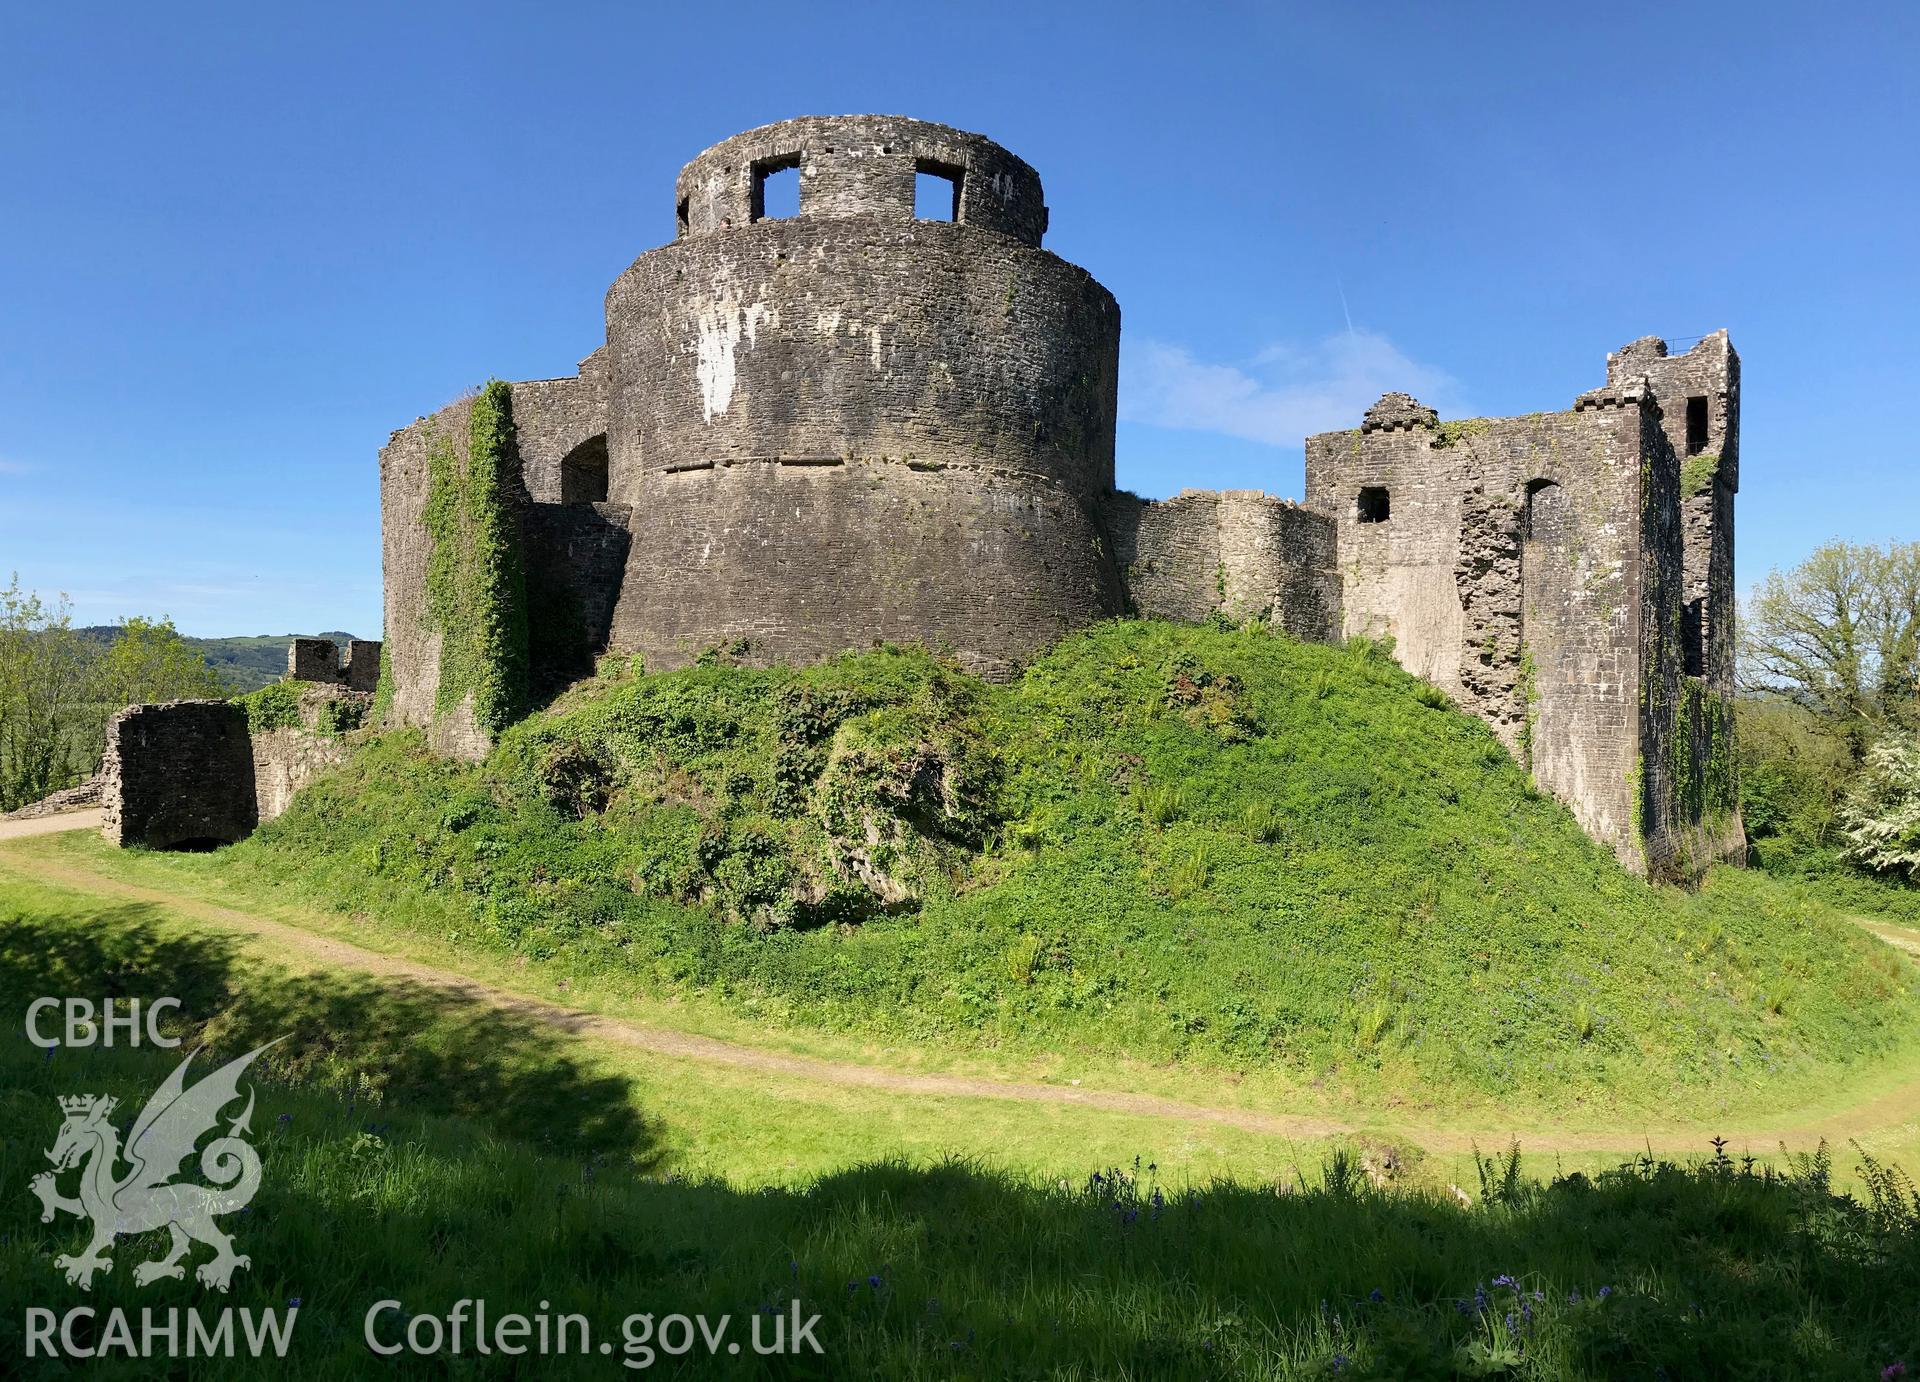 Digital colour photograph showing view of Dinefwr Castle, Llandeilo, taken by Paul R. Davis on 12th May 2019.